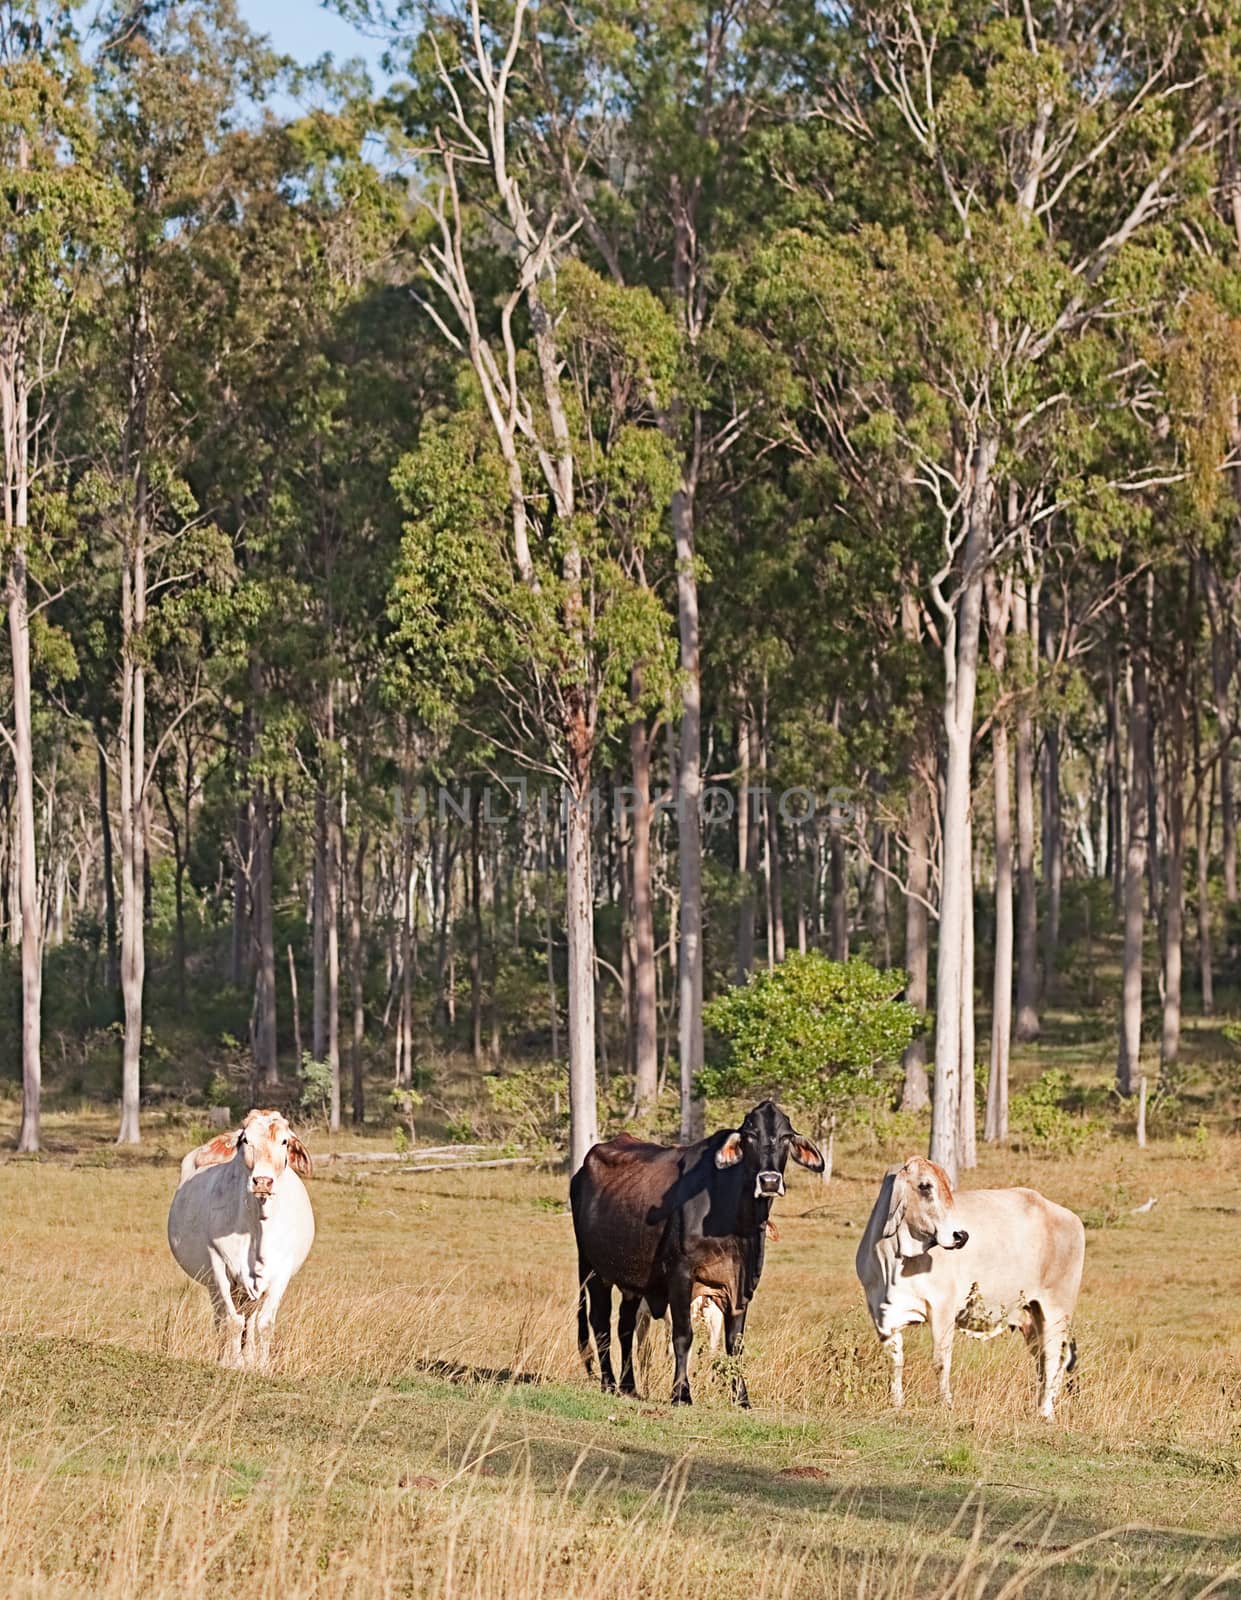 Three cows in Australian pastoral eucalyptus gum forest by sherj